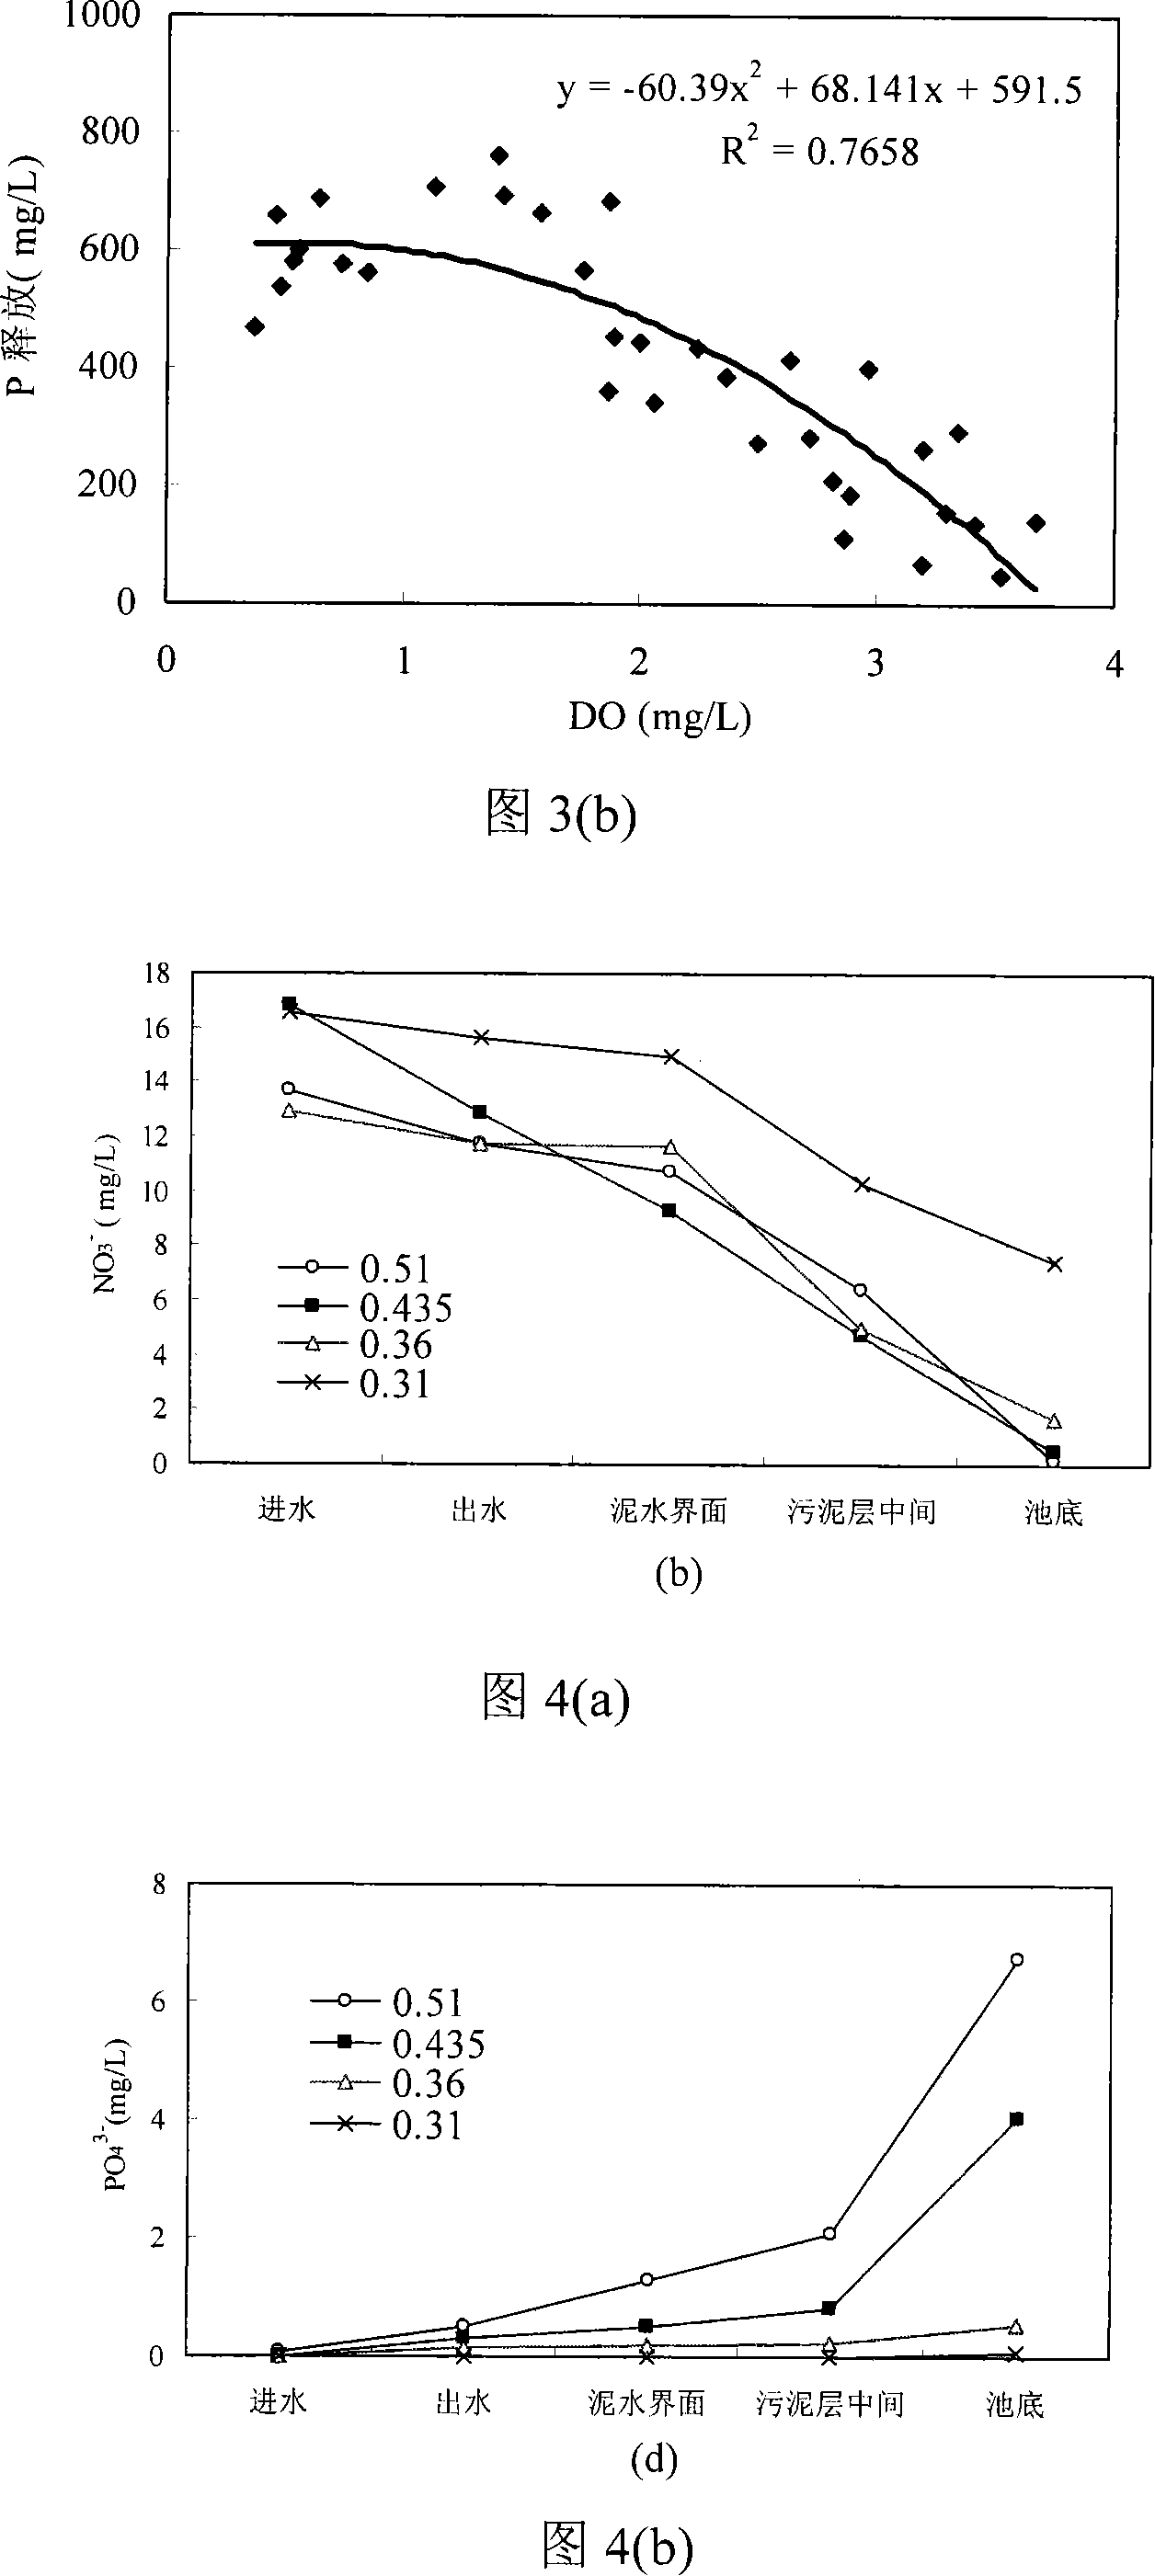 Method for optimizing controlling denitrification and phosphorus release in double precipitation pool by A*/O technique